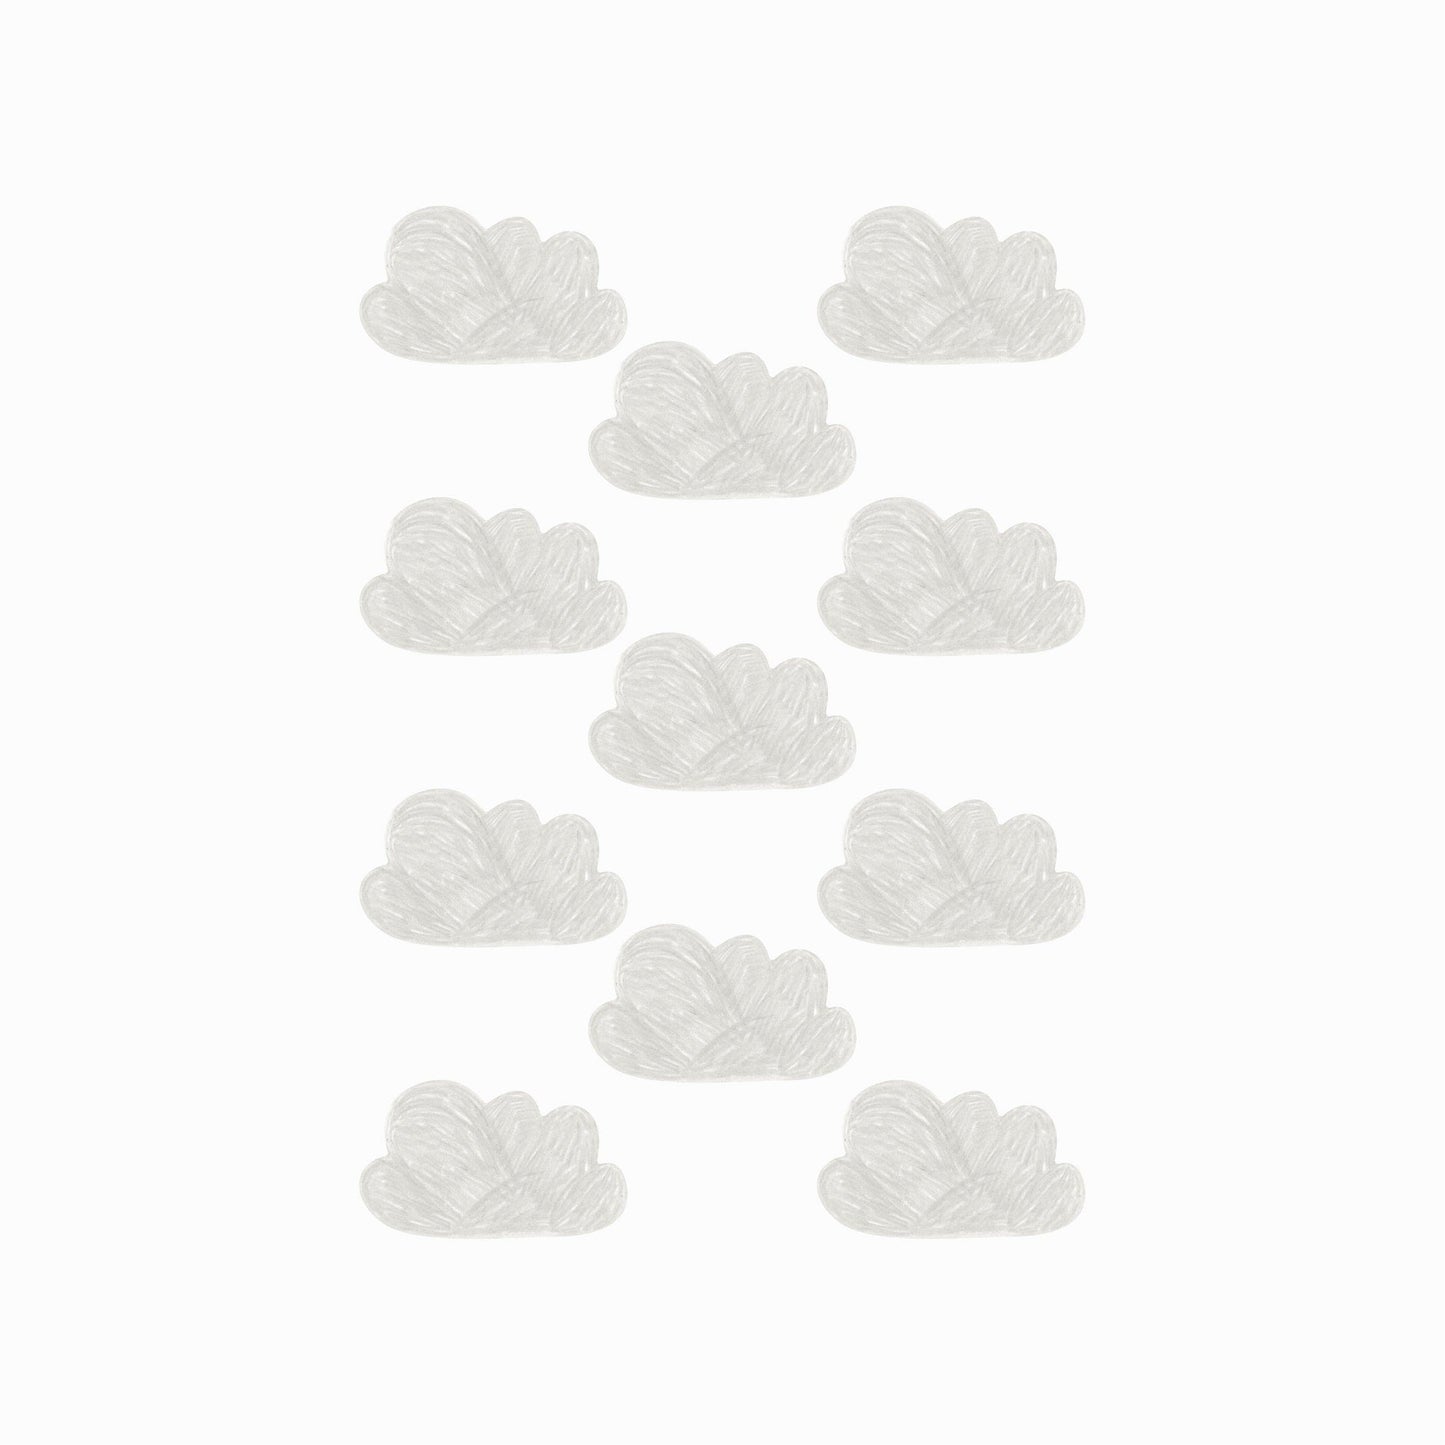 Image showng a sheet of the hand-painted mini cloud wall stickers in grey